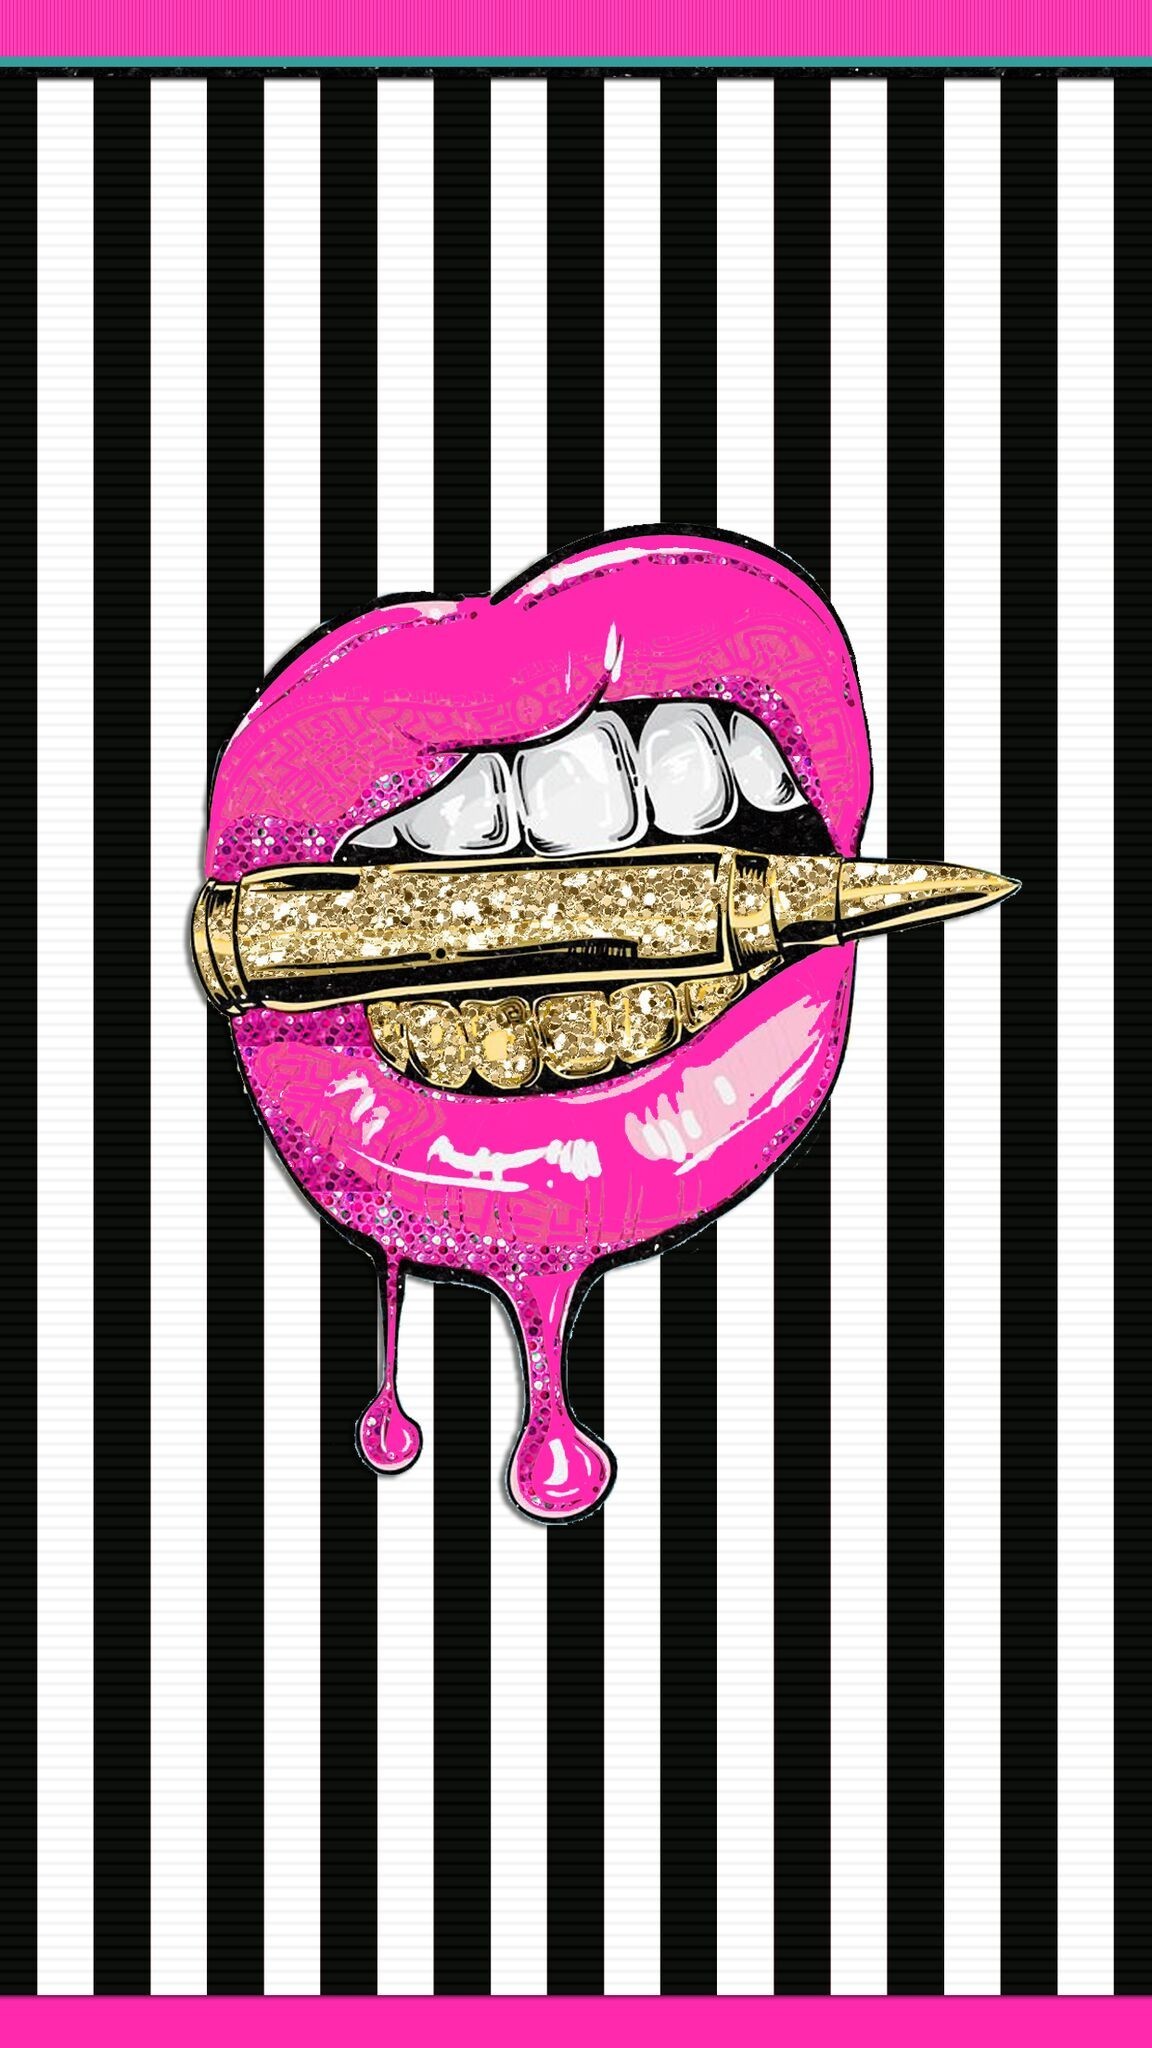 1152x2048 Dope Wallpapers, Iphone 3, Pink Wallpaper, Betsey Johnson, Kisses, Bullet,  Zombies, Pop Culture, Hello Kitty